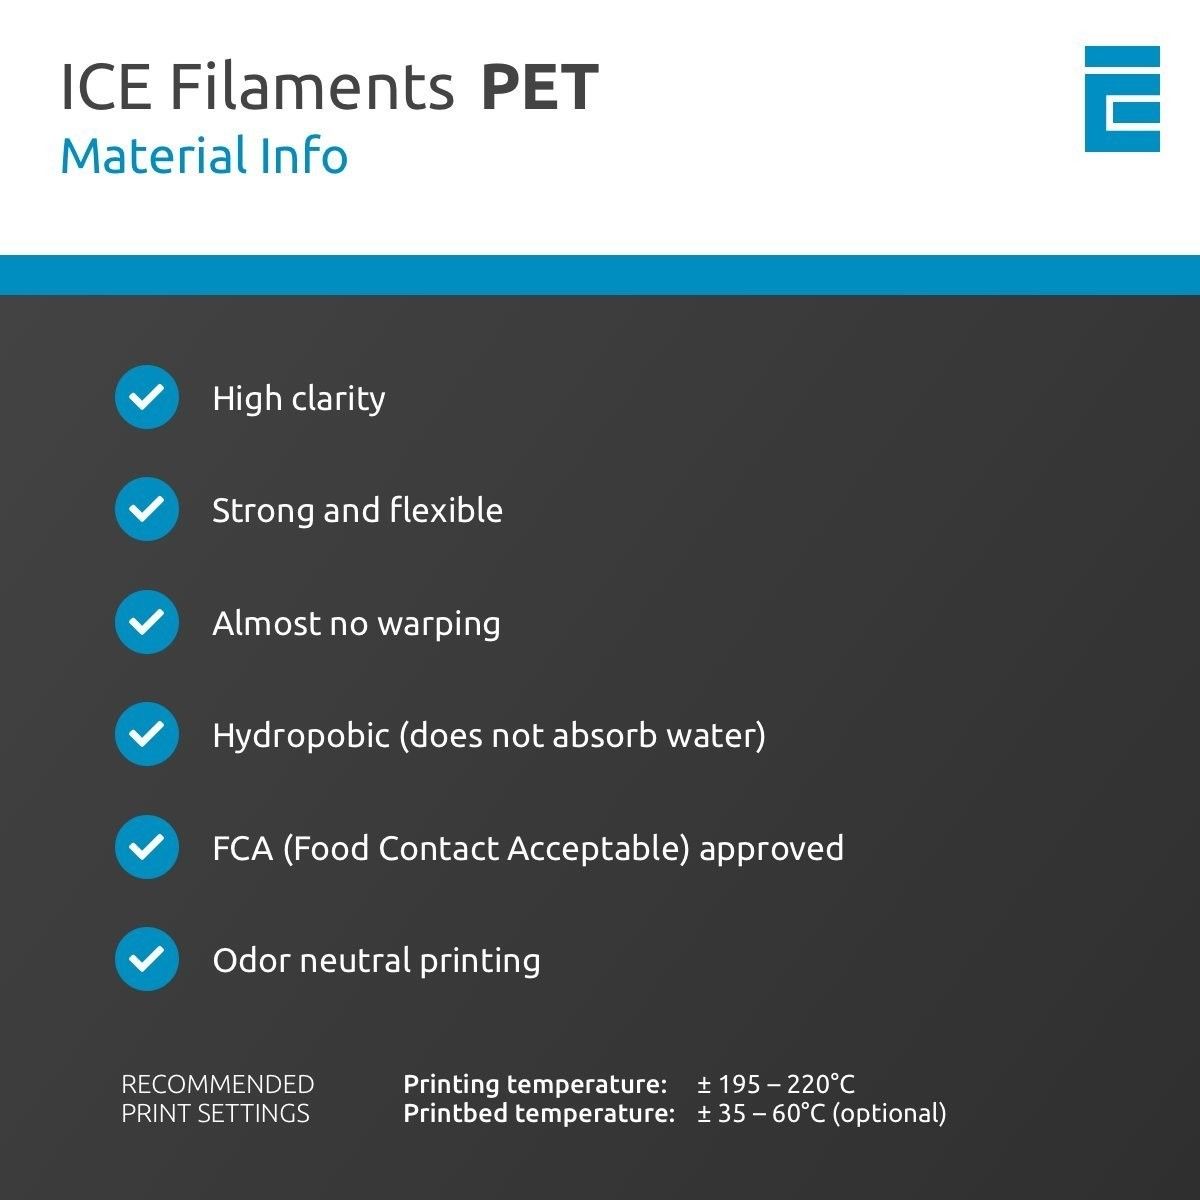 Ice Filaments Pet Filament 175 Mm 075 Kg Cunning Clear Icefil1pet152